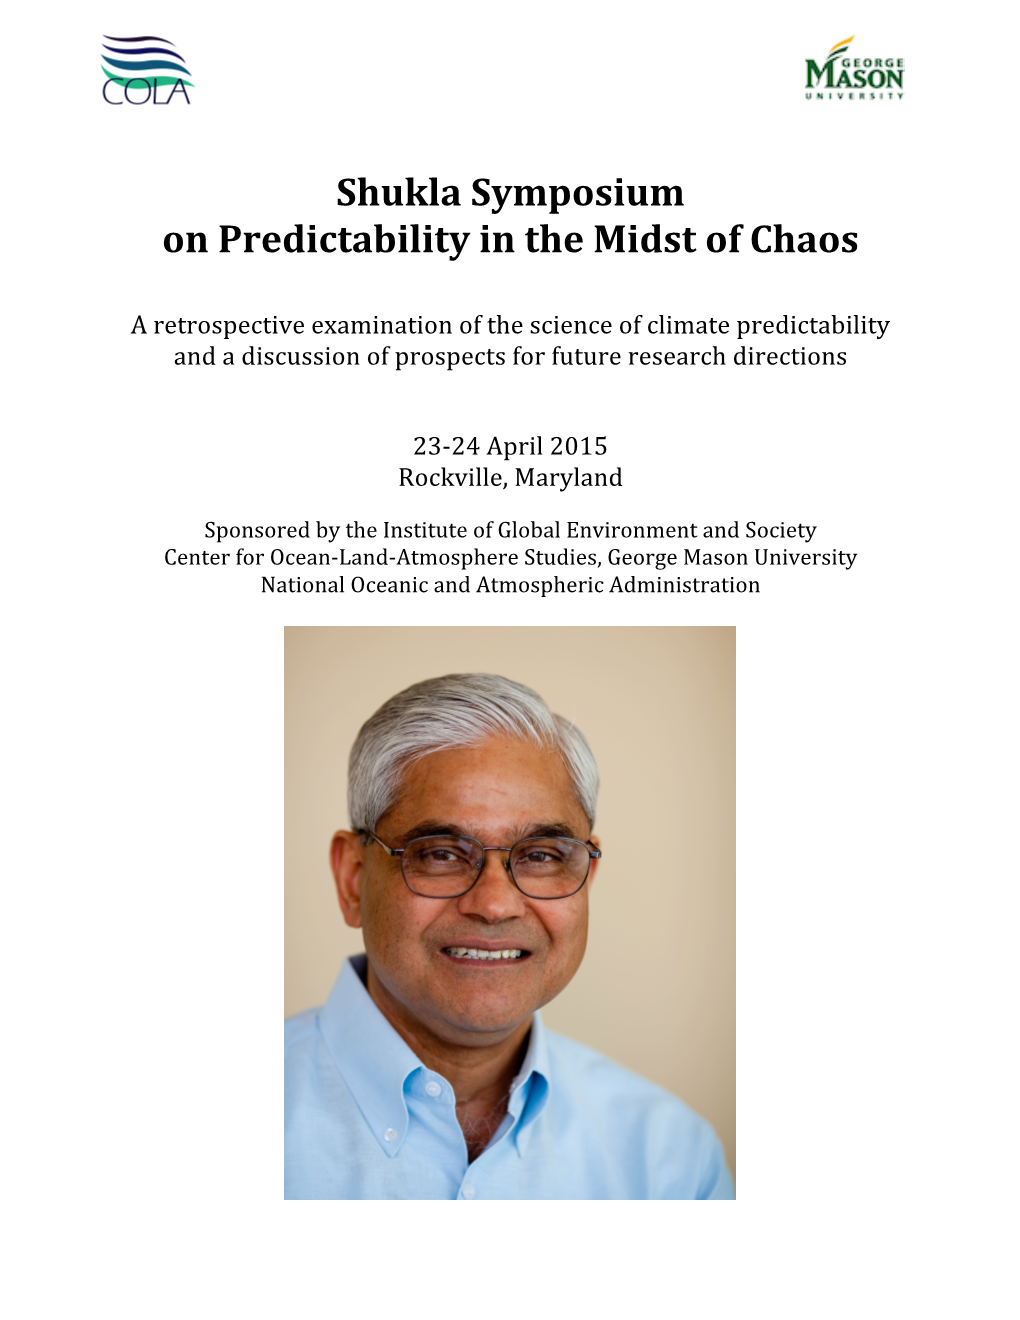 Shukla Symposium on Predictability in the Midst of Chaos